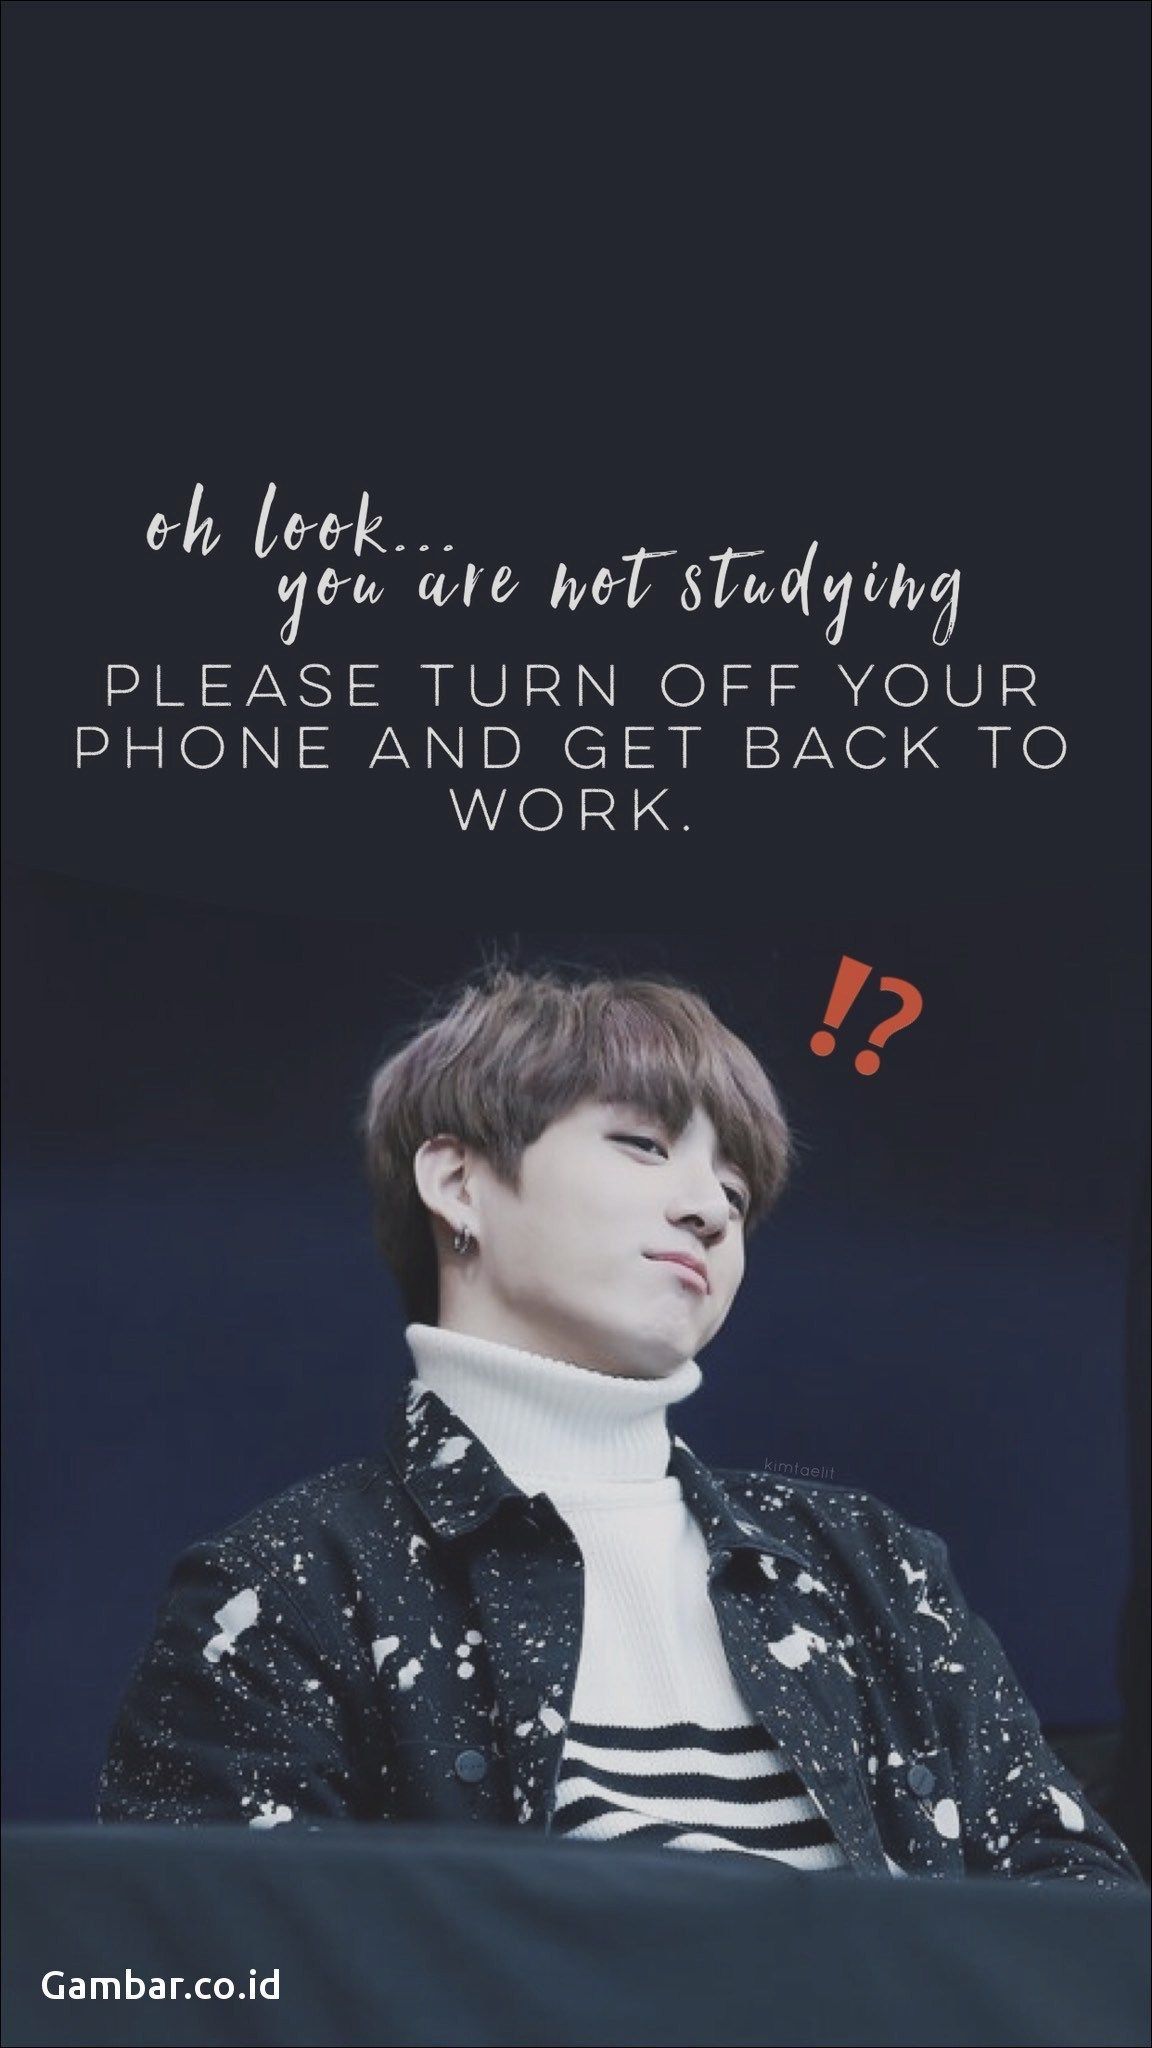 Wallpaper of BTS member Jimin with a text that says 